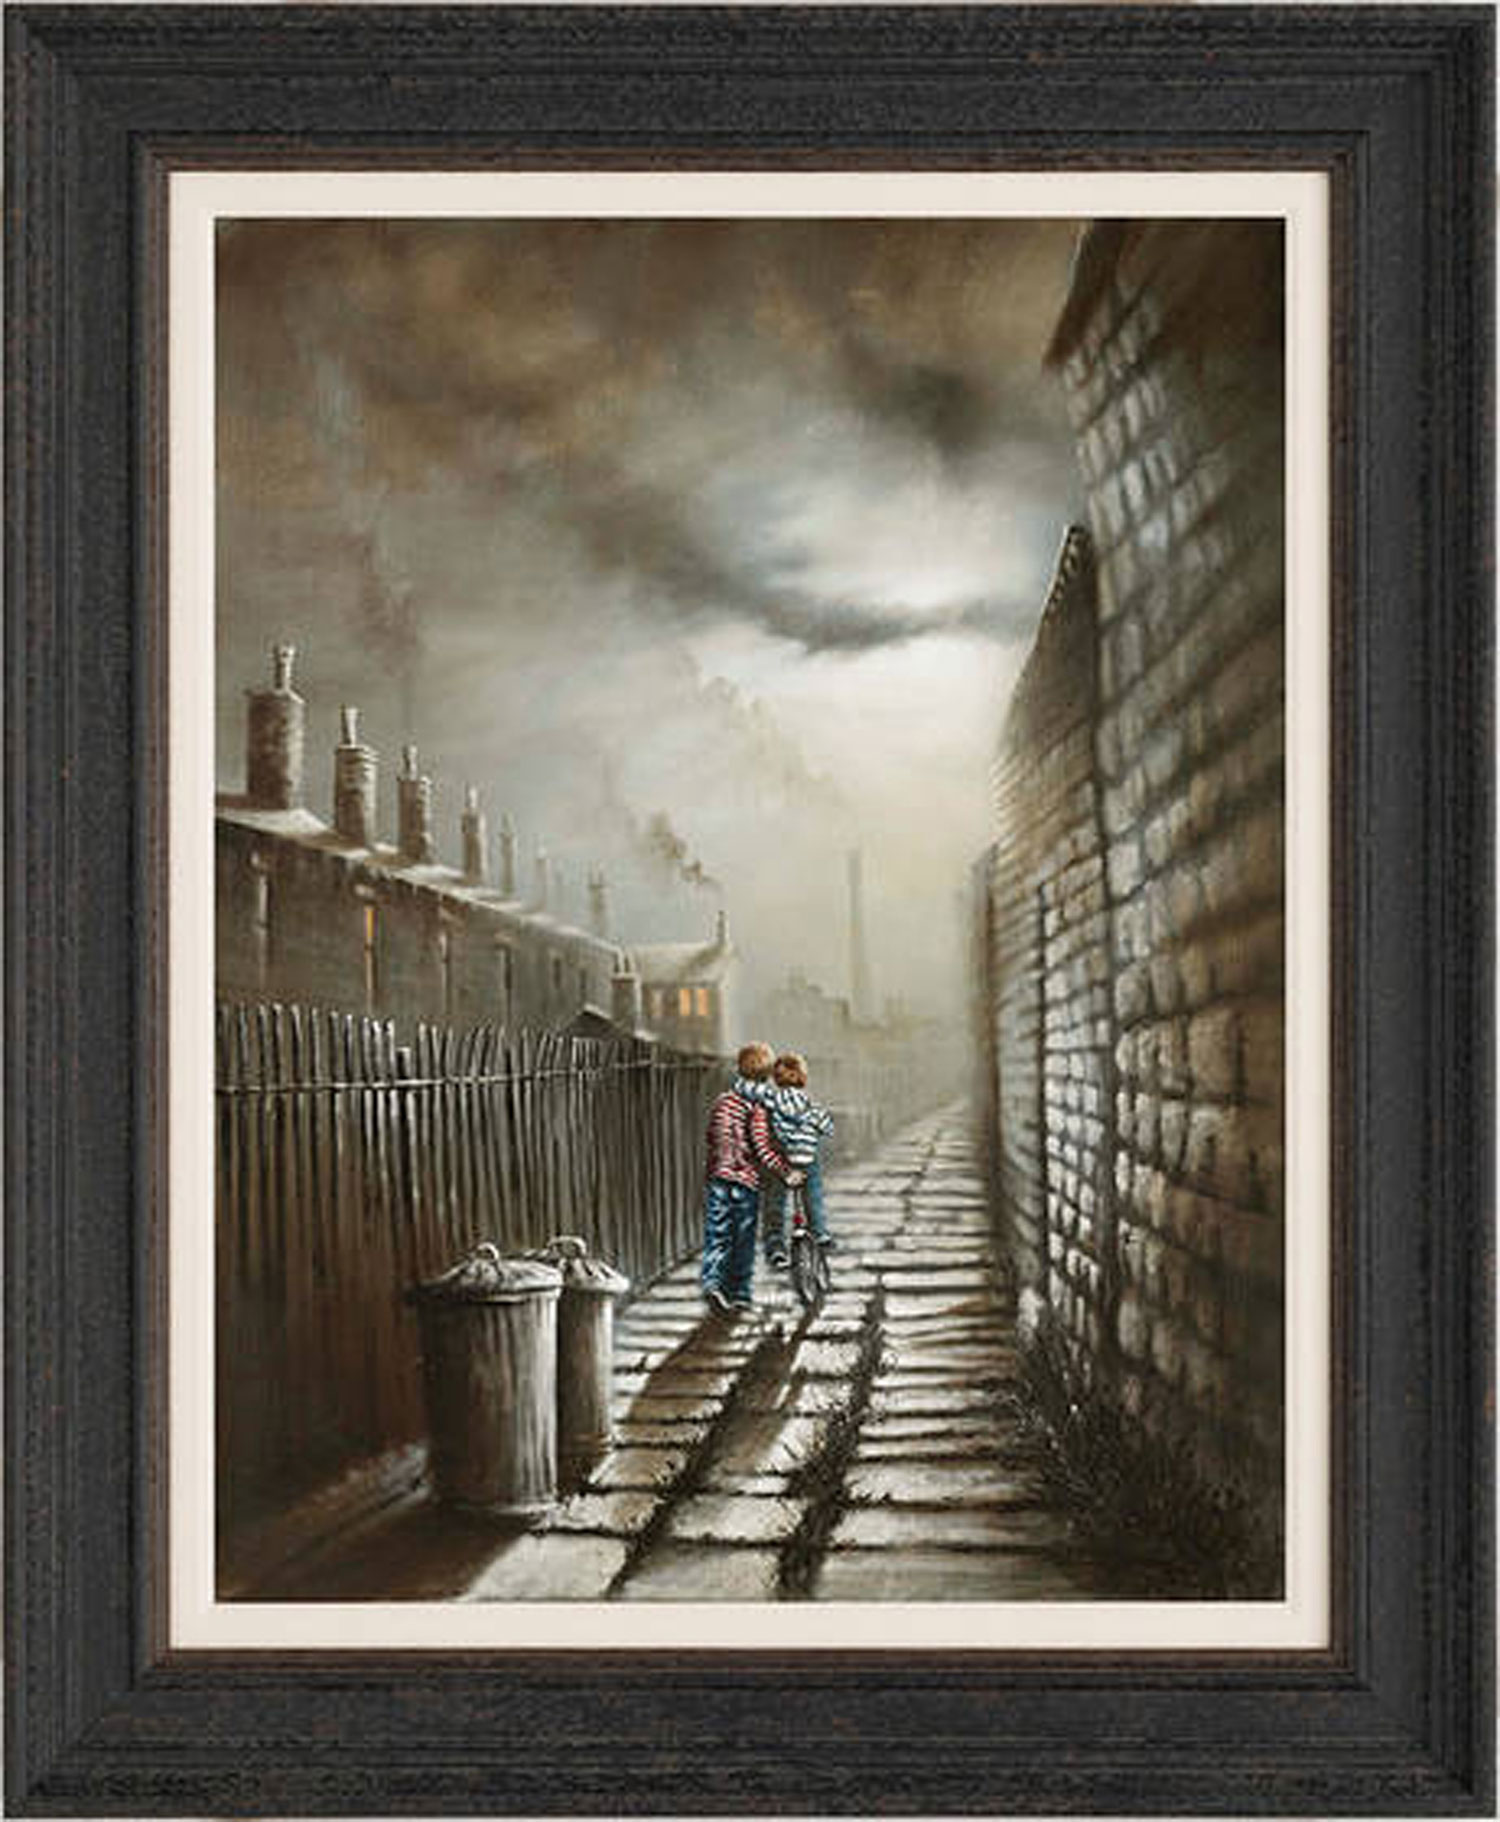 Bob Barker Gonna Be A Bumpy Ride Signed Limited Edition Print